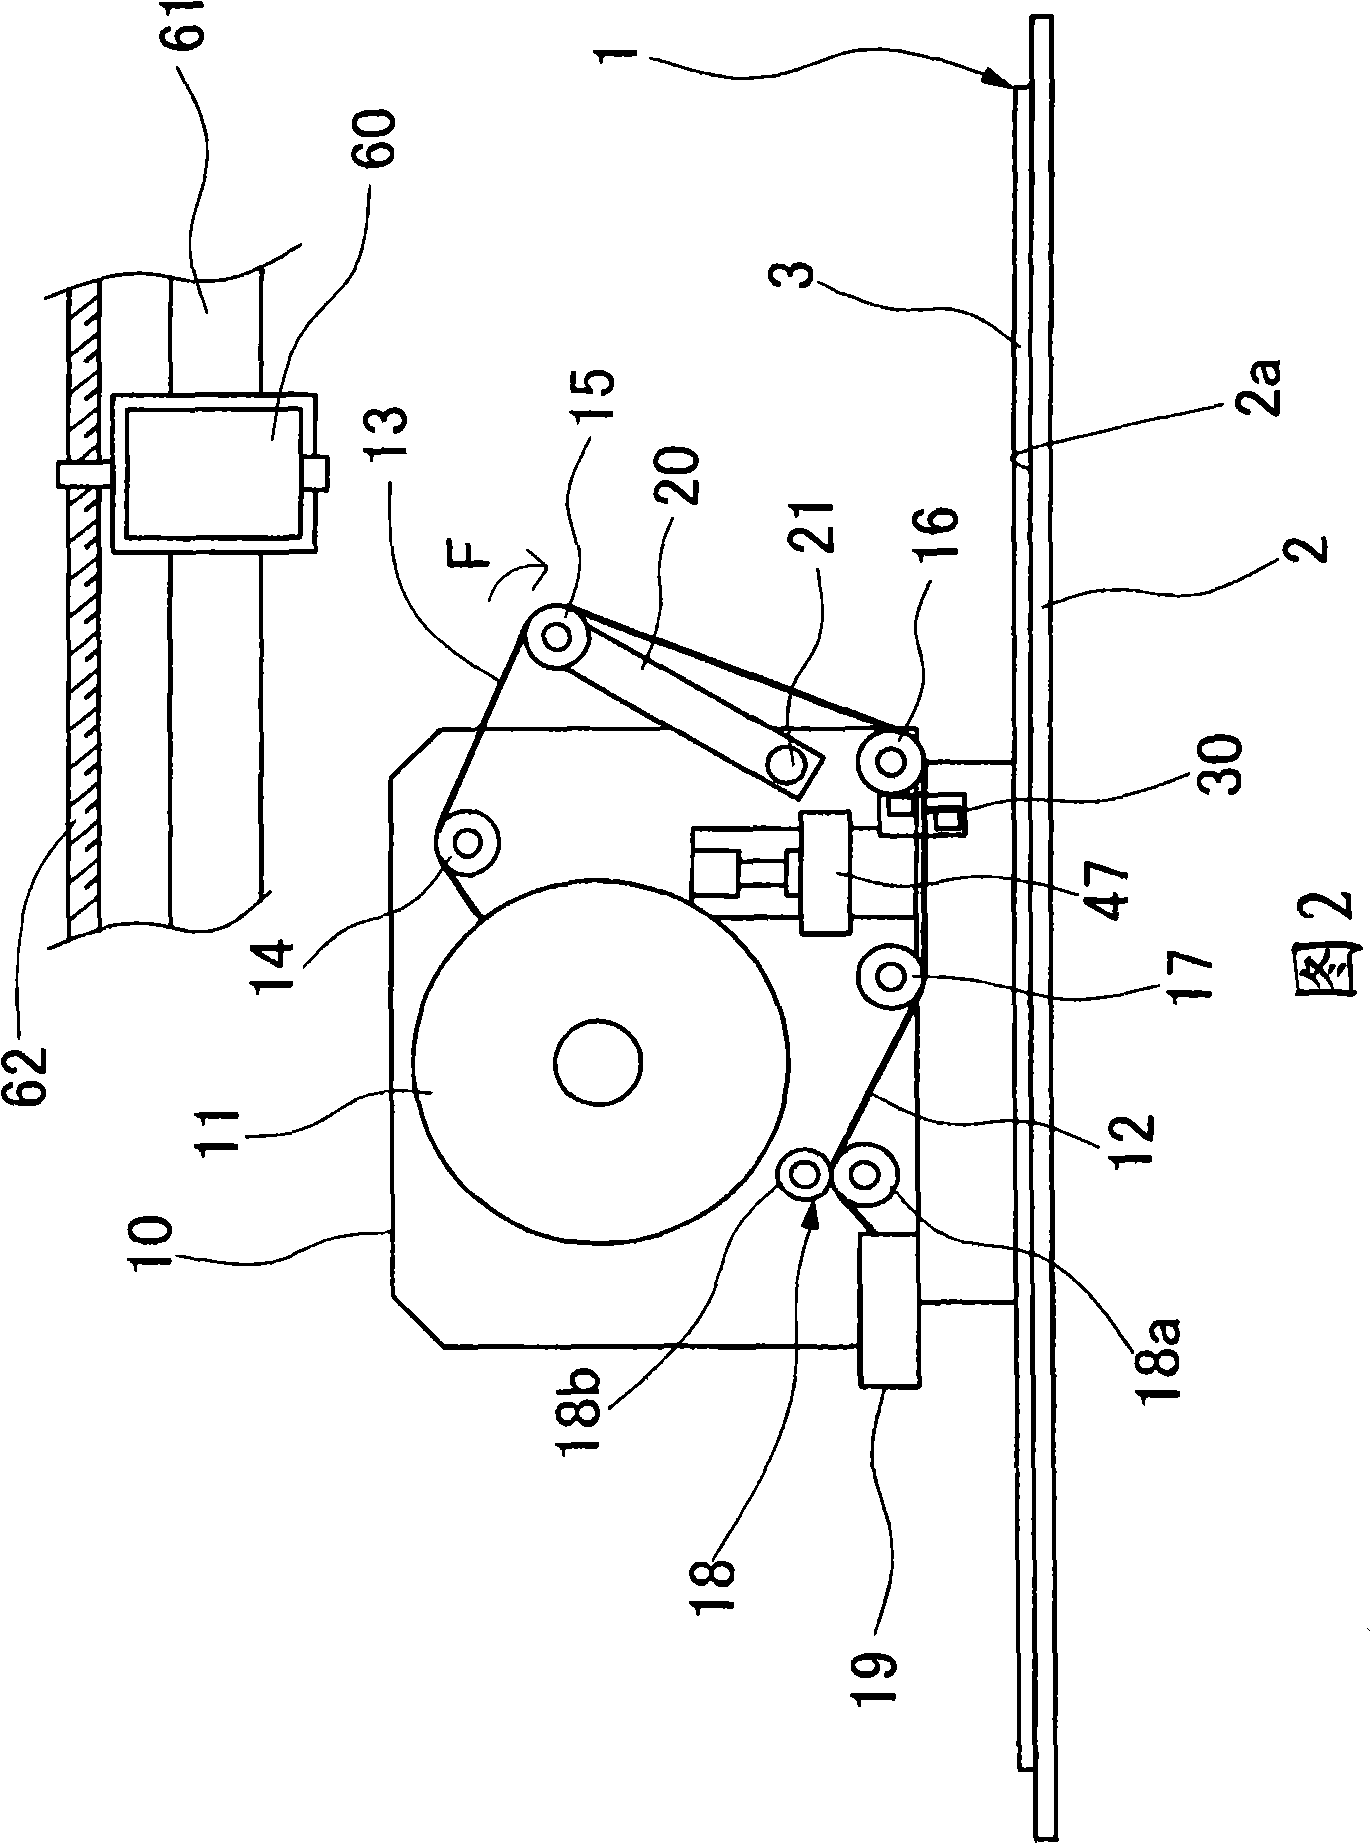 ACF paste device and flat panel display